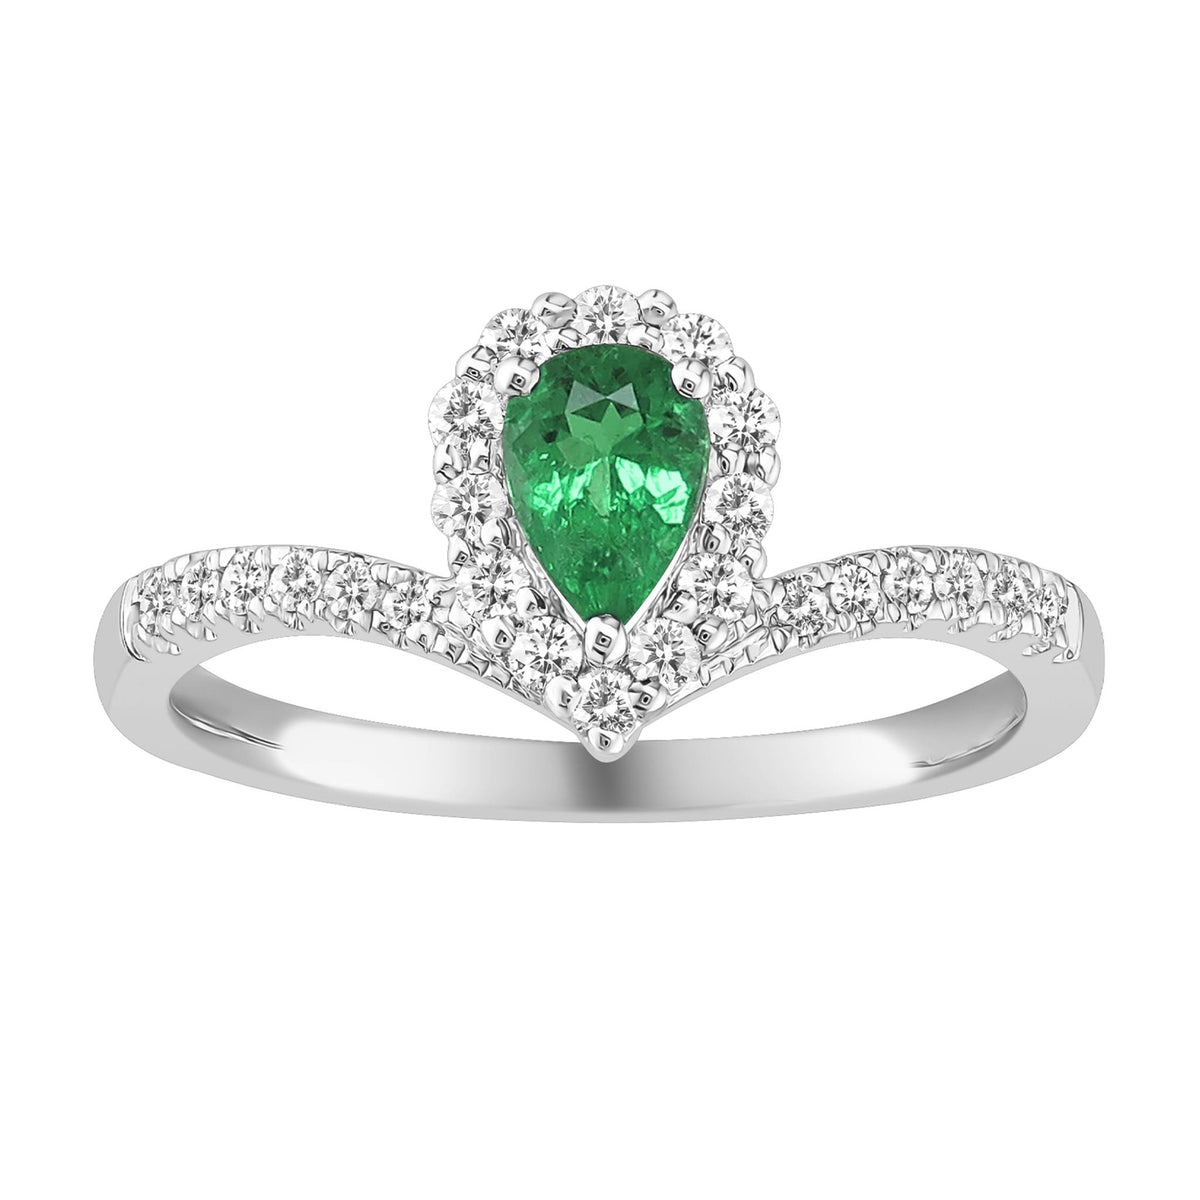 14Kt White Gold Halo Gemstone Ring With 0.35ct Emerald